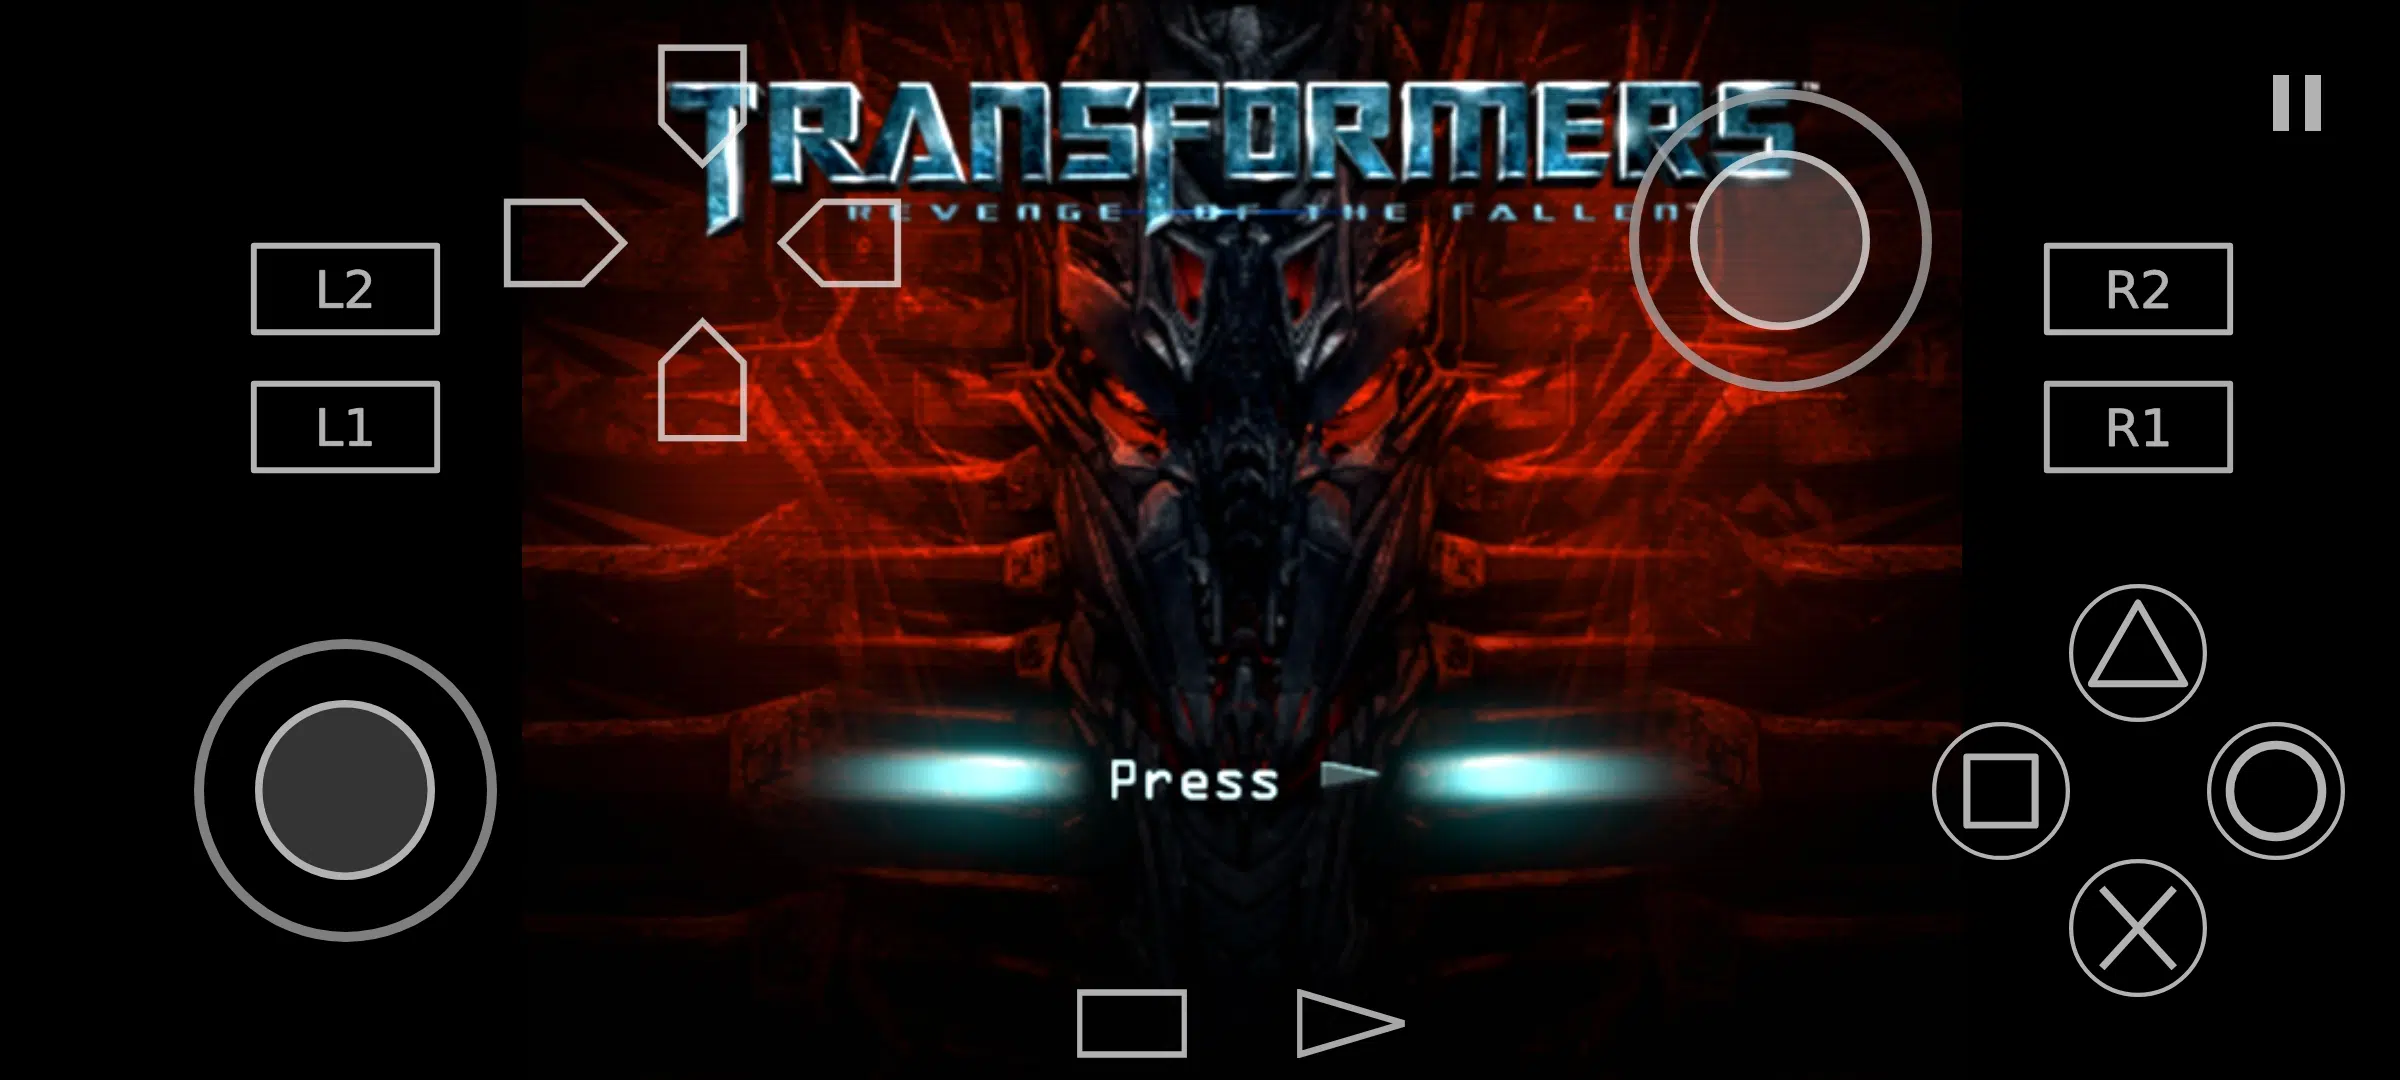 Transformers Revenge of the Fallen Game Изтеглете Android APK - AetherSX2 Ps2 емулатор